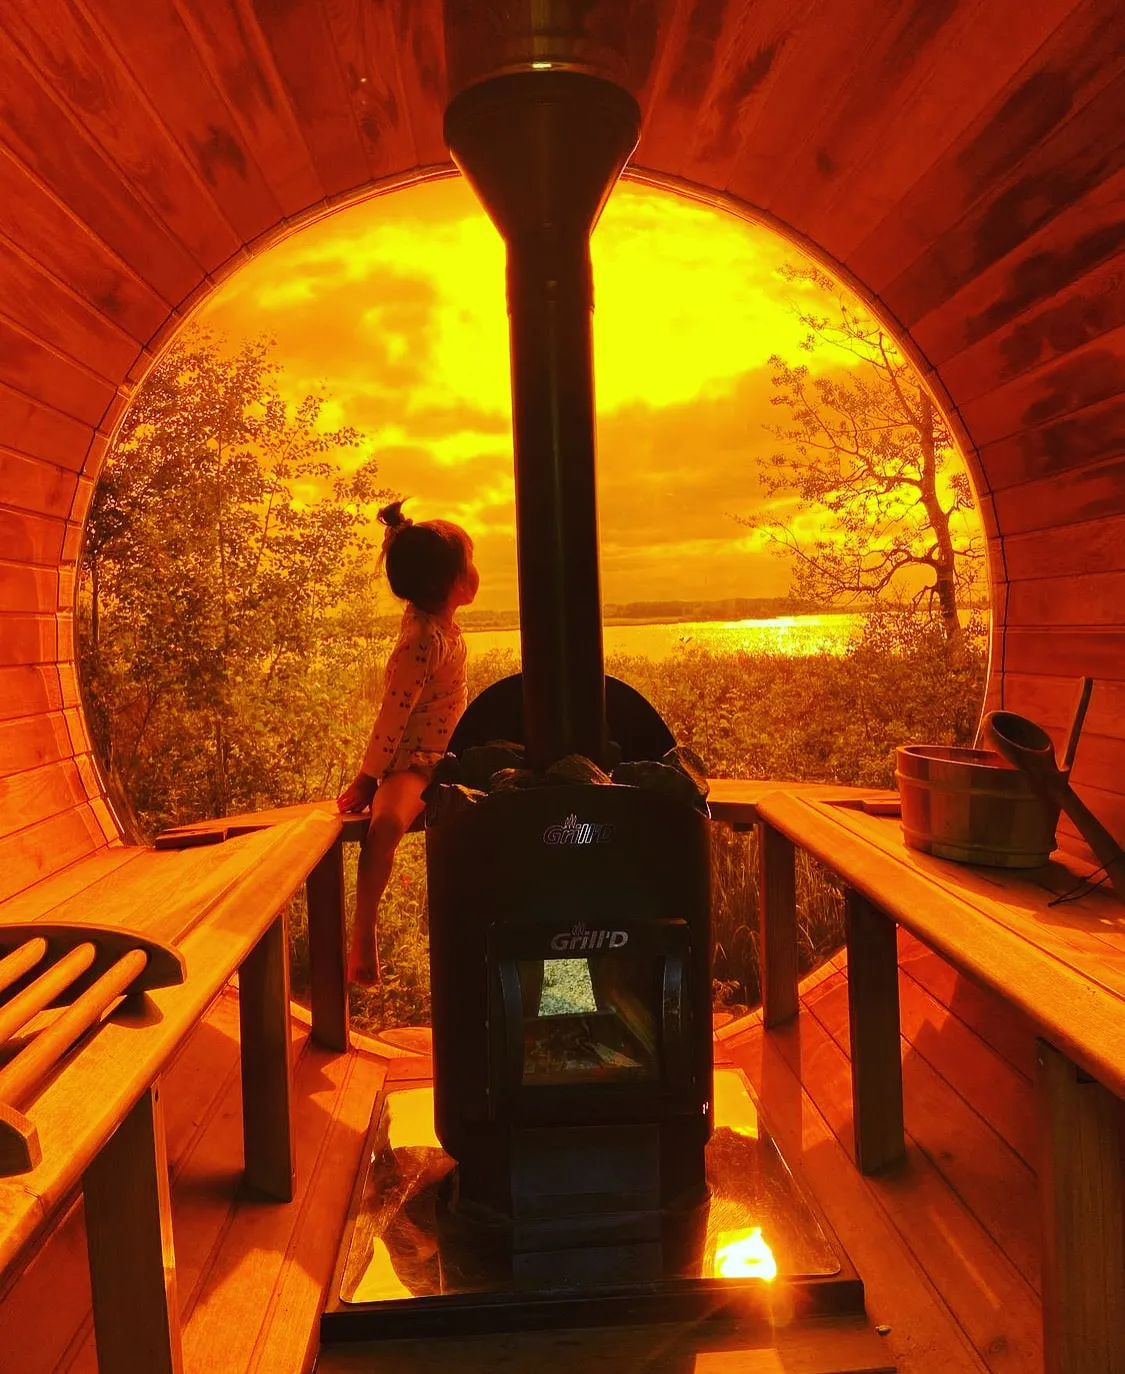 A small child enjoying the outdoor dry sauna looking outside during a sunsset